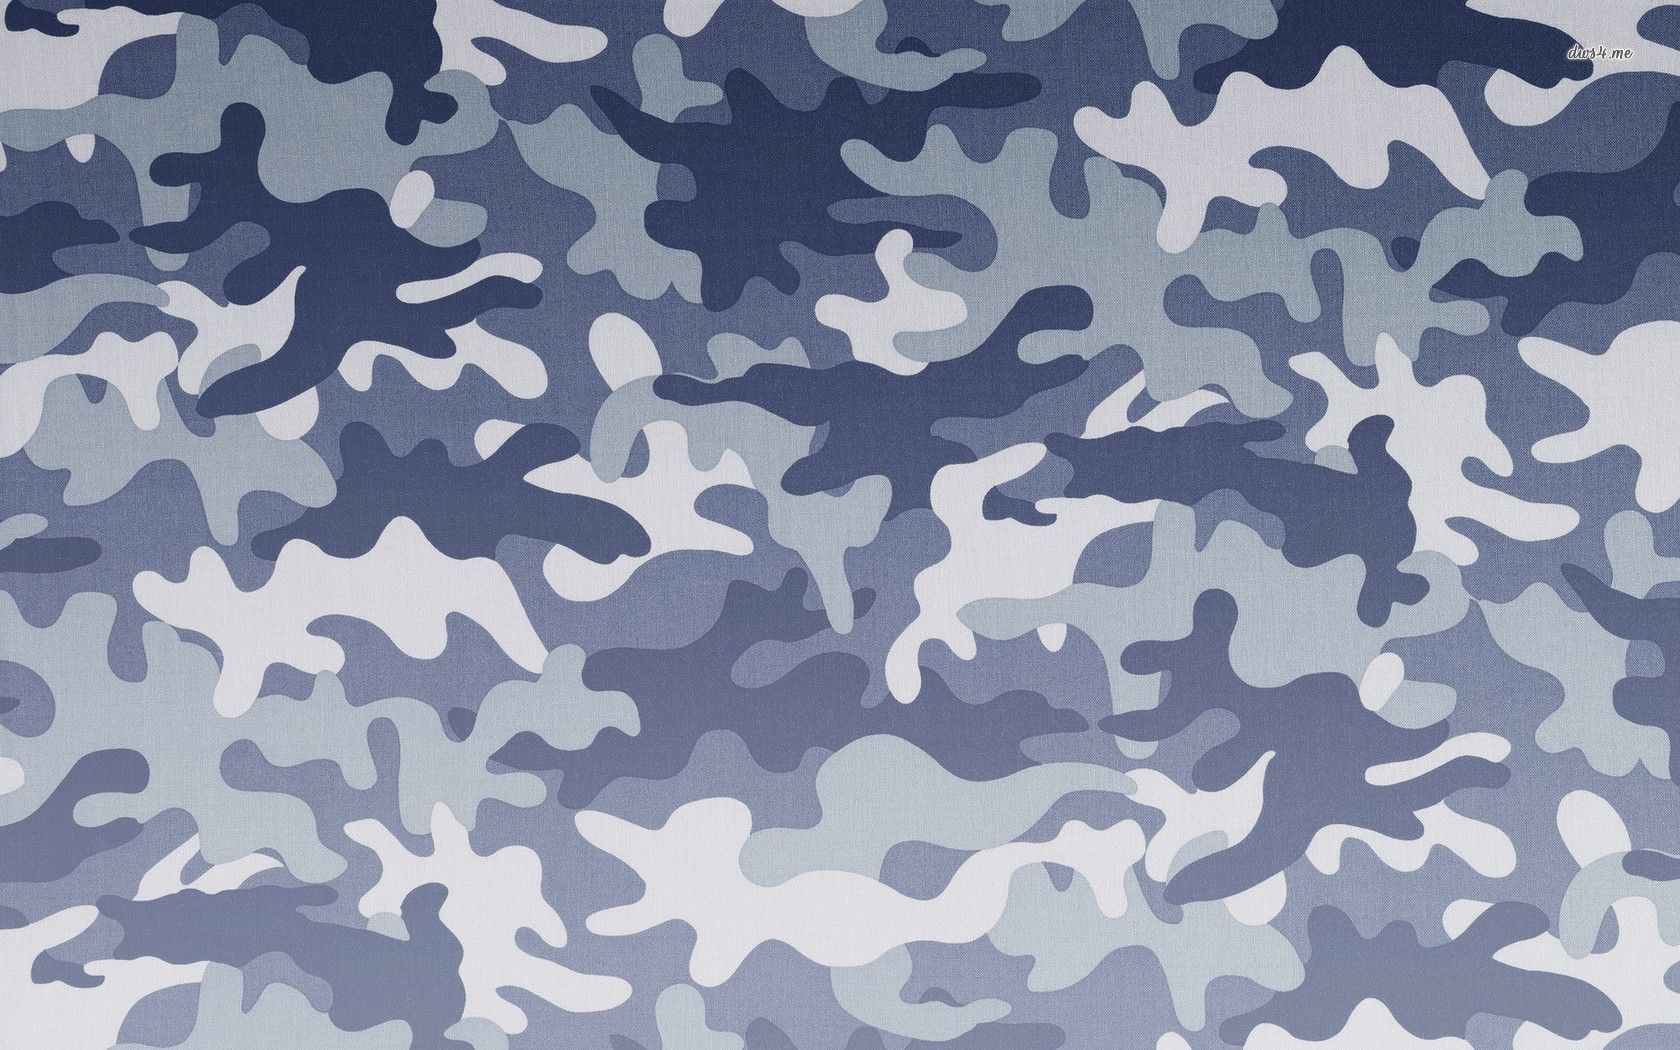 Camouflage pattern wallpaper - Abstract wallpapers - #12016